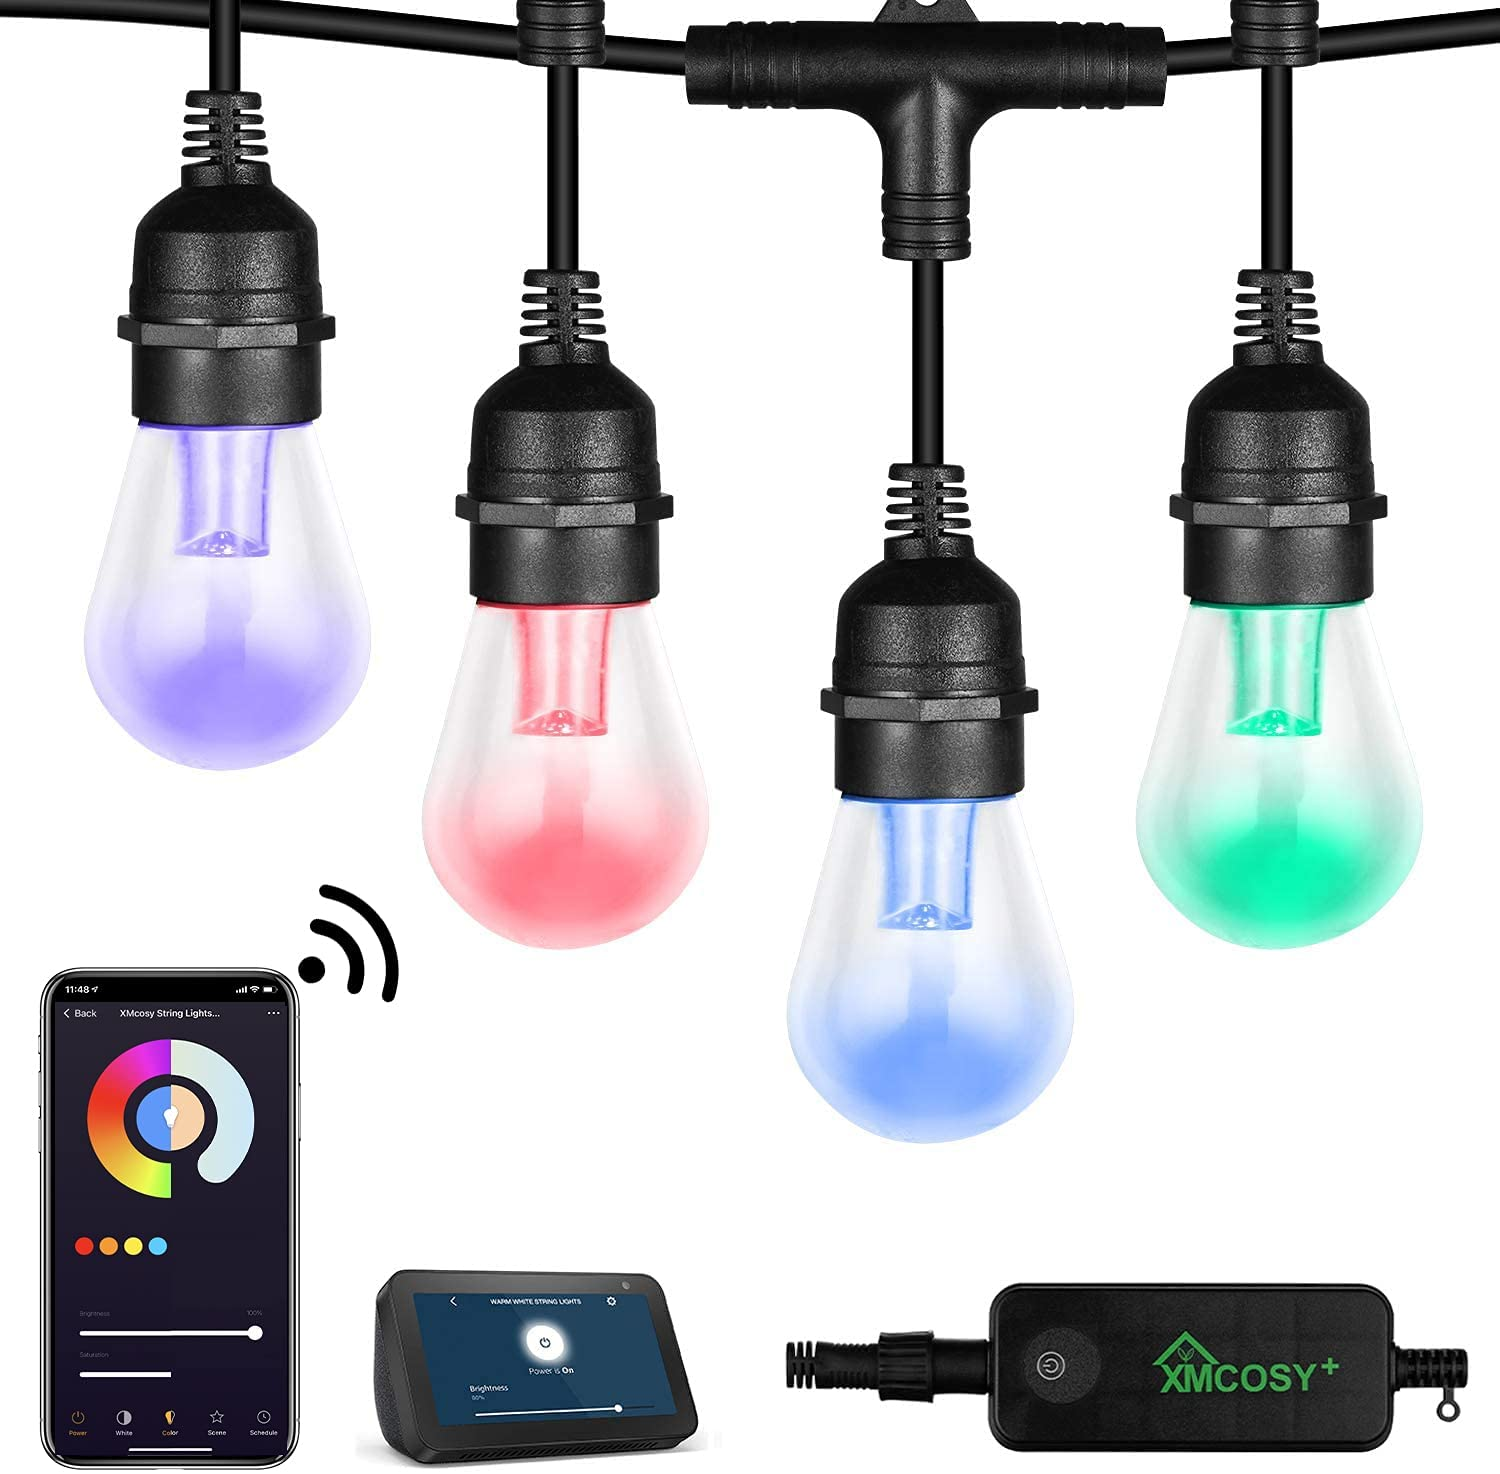 XMCOSY+ RGB Outdoor String Lights  